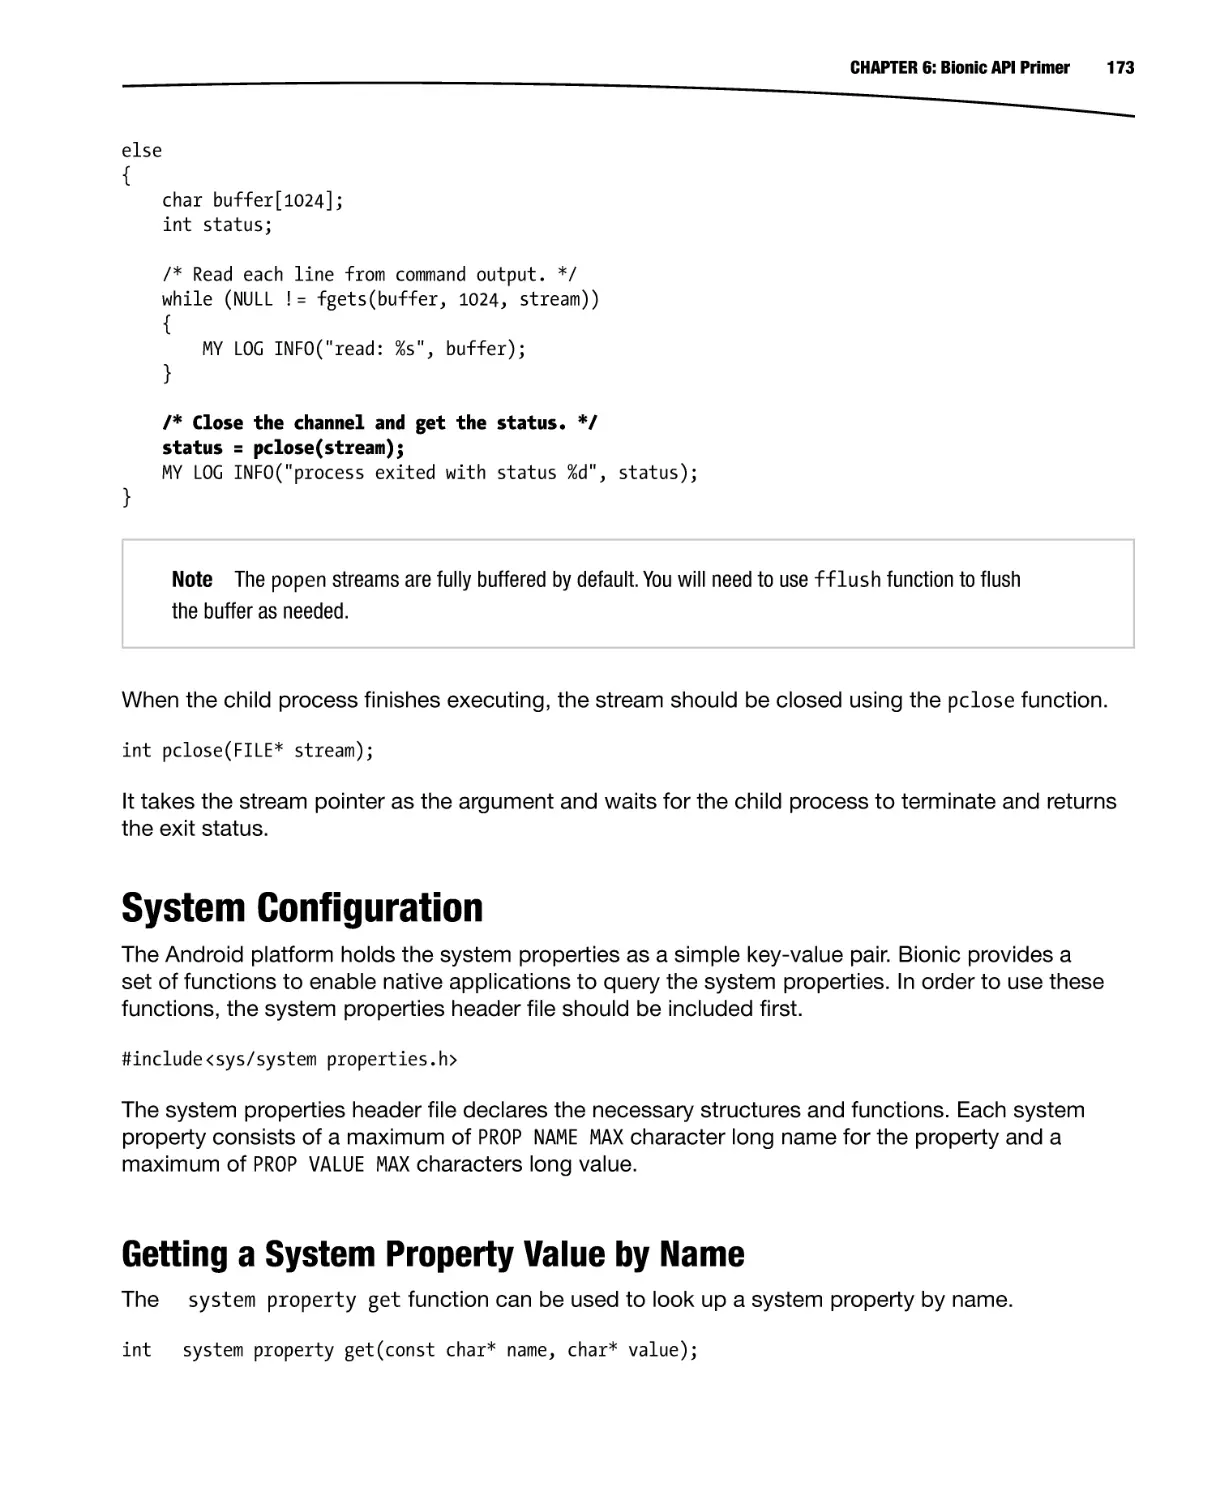 System Configuration
Getting a System Property Value by Name